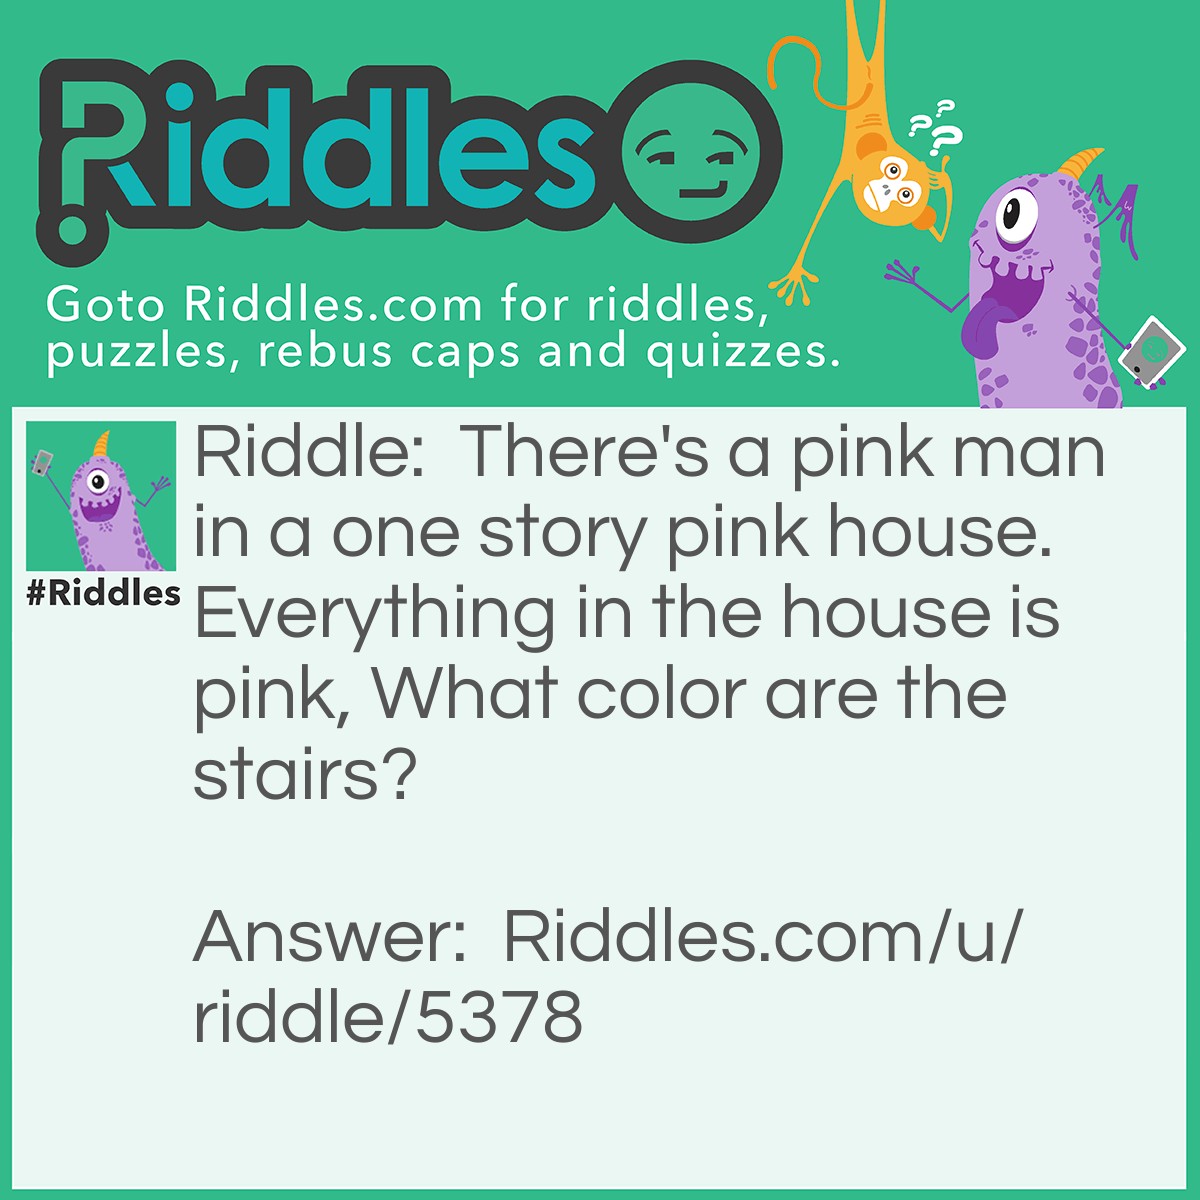 Riddle: There's a pink man in a one story pink house. Everything in the house is pink, What color are the stairs? Answer: There are no stairs, it's a one story house!!!